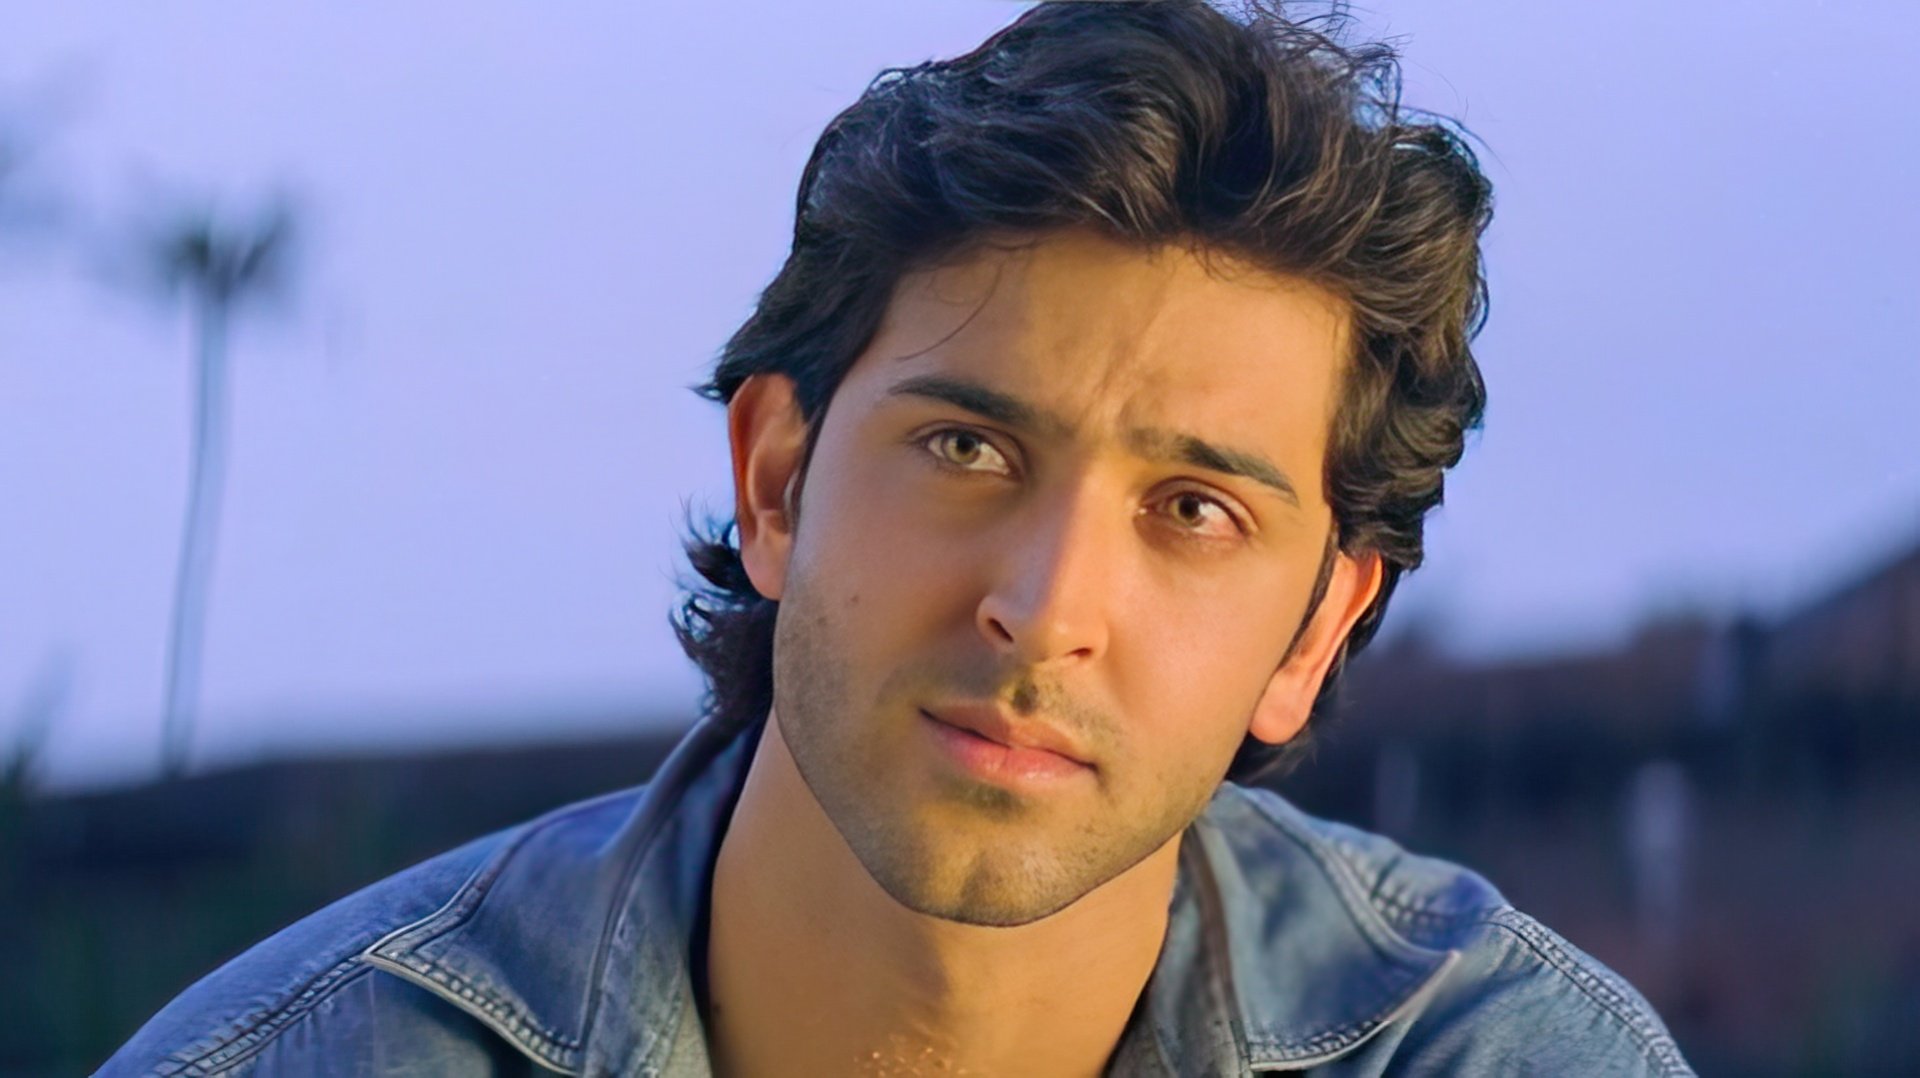 Hrithik Roshan at the Beginning of his Career (A Frame from the Film Say... You are in Love)